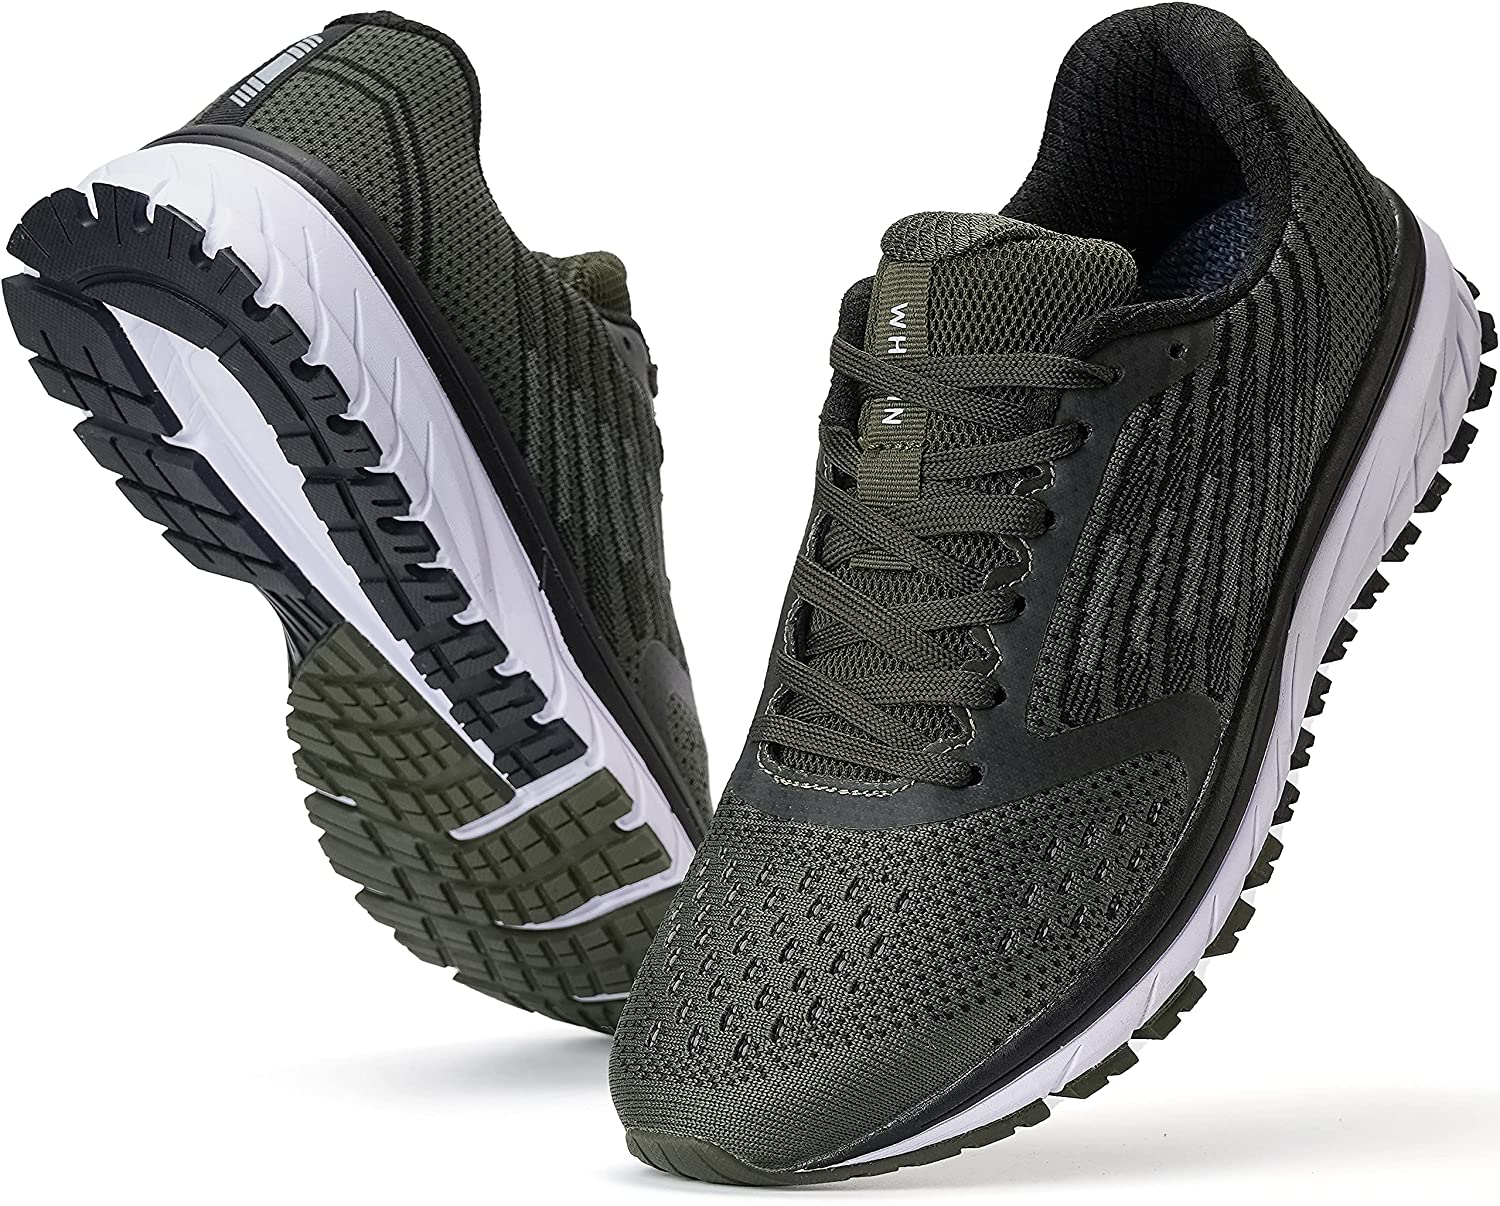 JOOMRA Mens Supportive Running Shoes Lightweight Athletic Sneakers